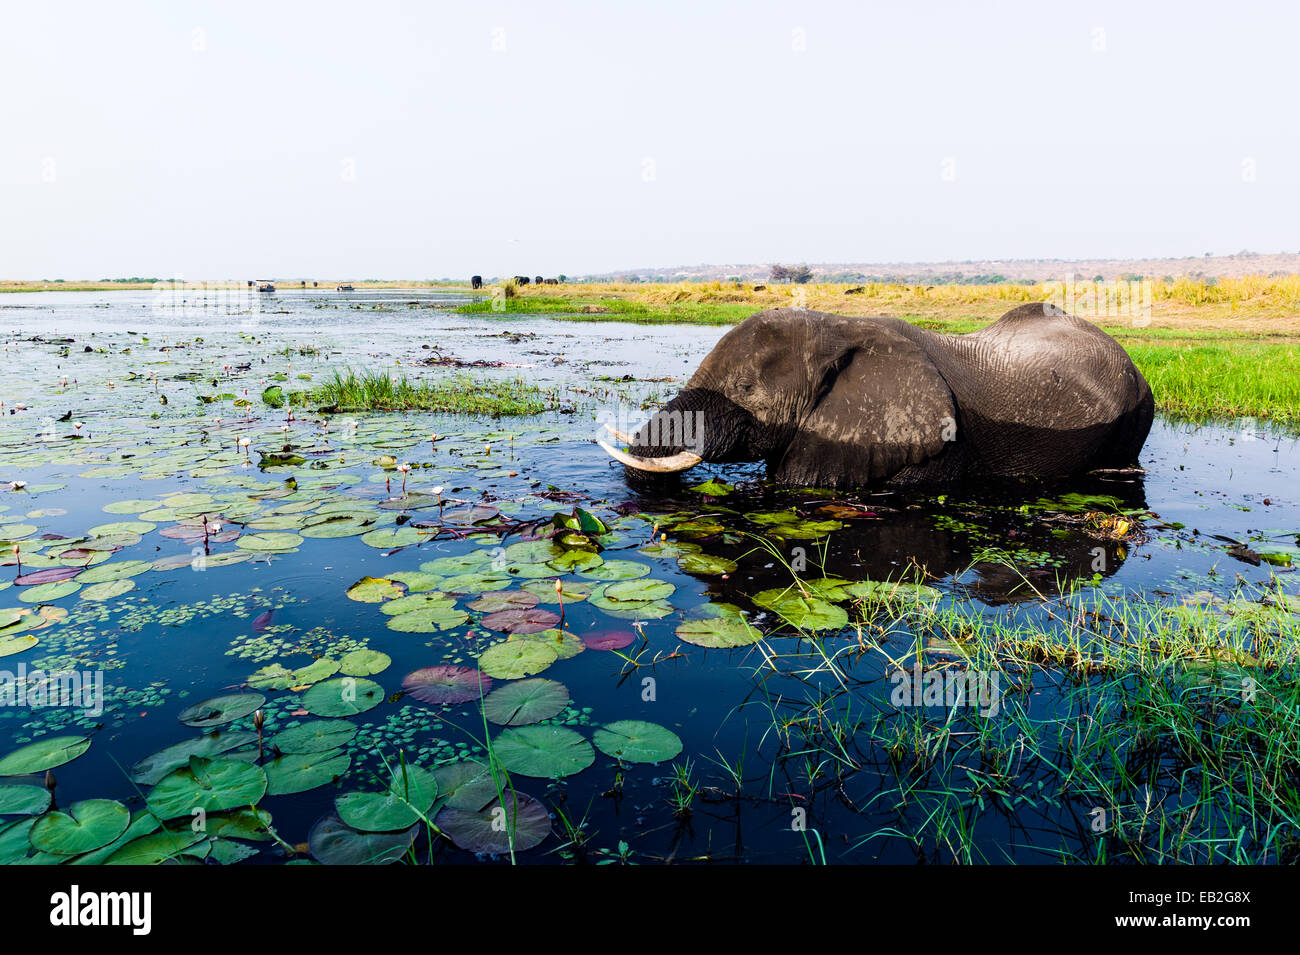 An African Elephant feeding on water plants in a flooded wetland. Stock Photo